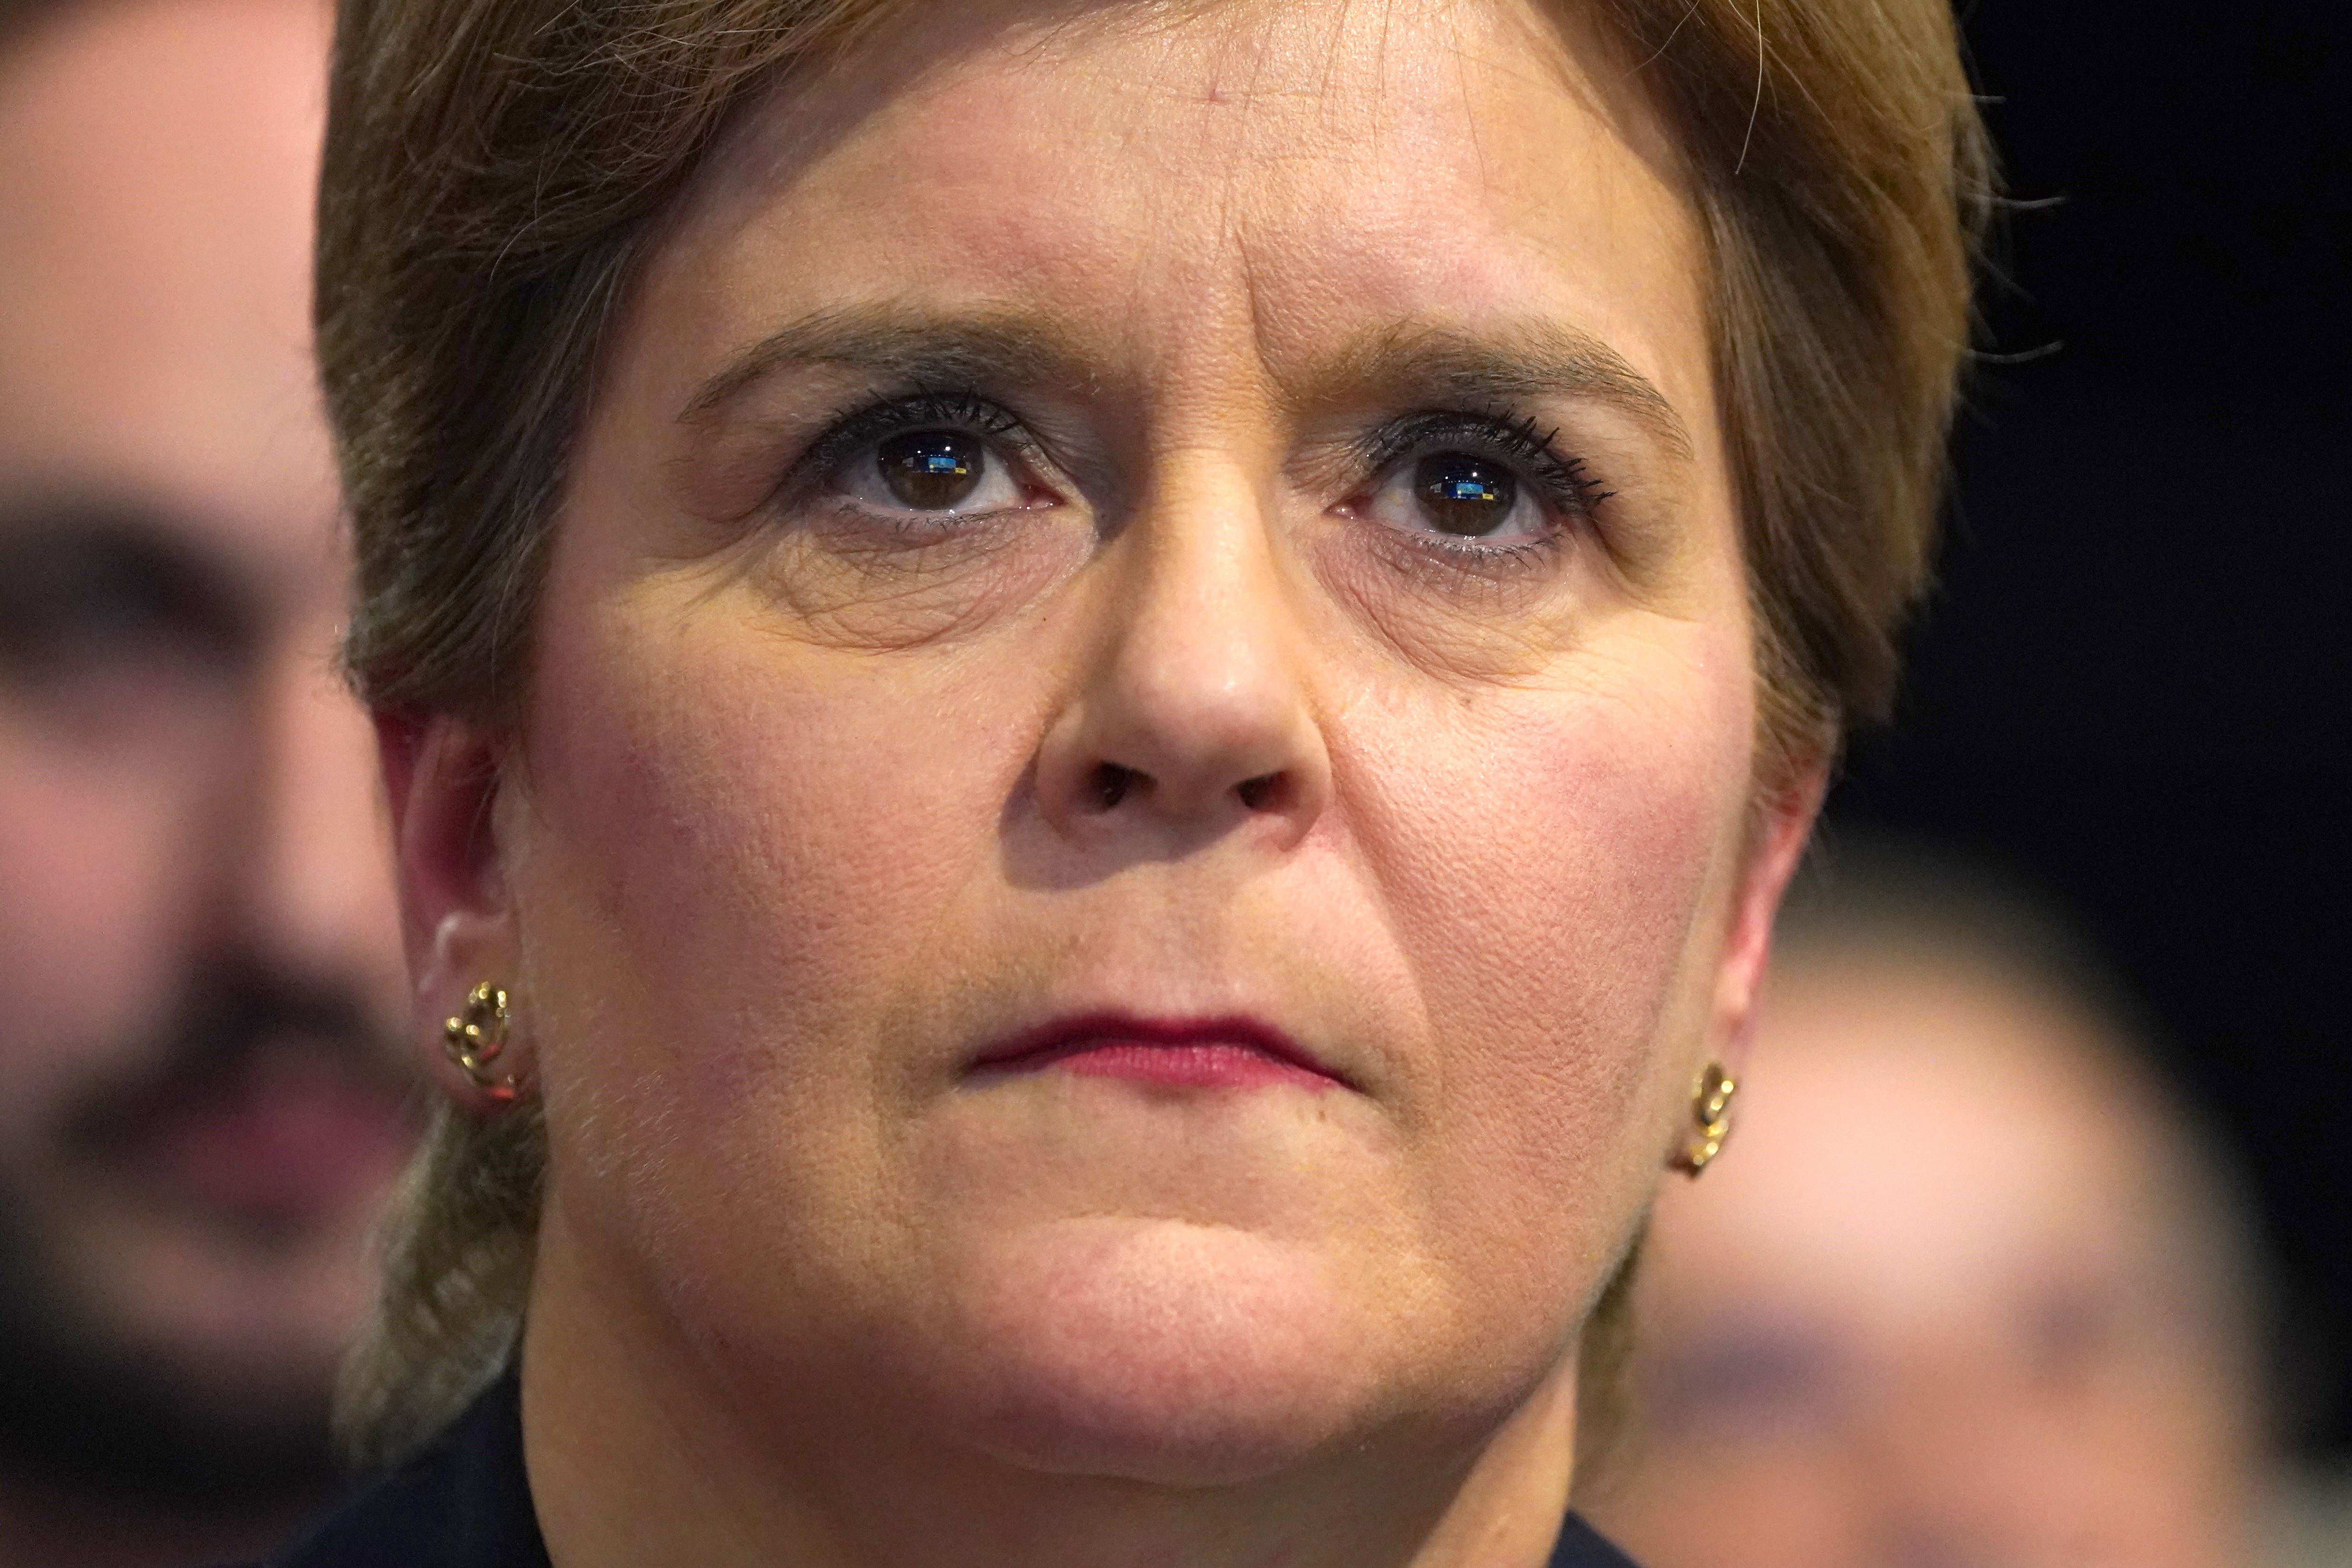 Sturgeon is under scrutiny over her use of private emails and deletion of messages